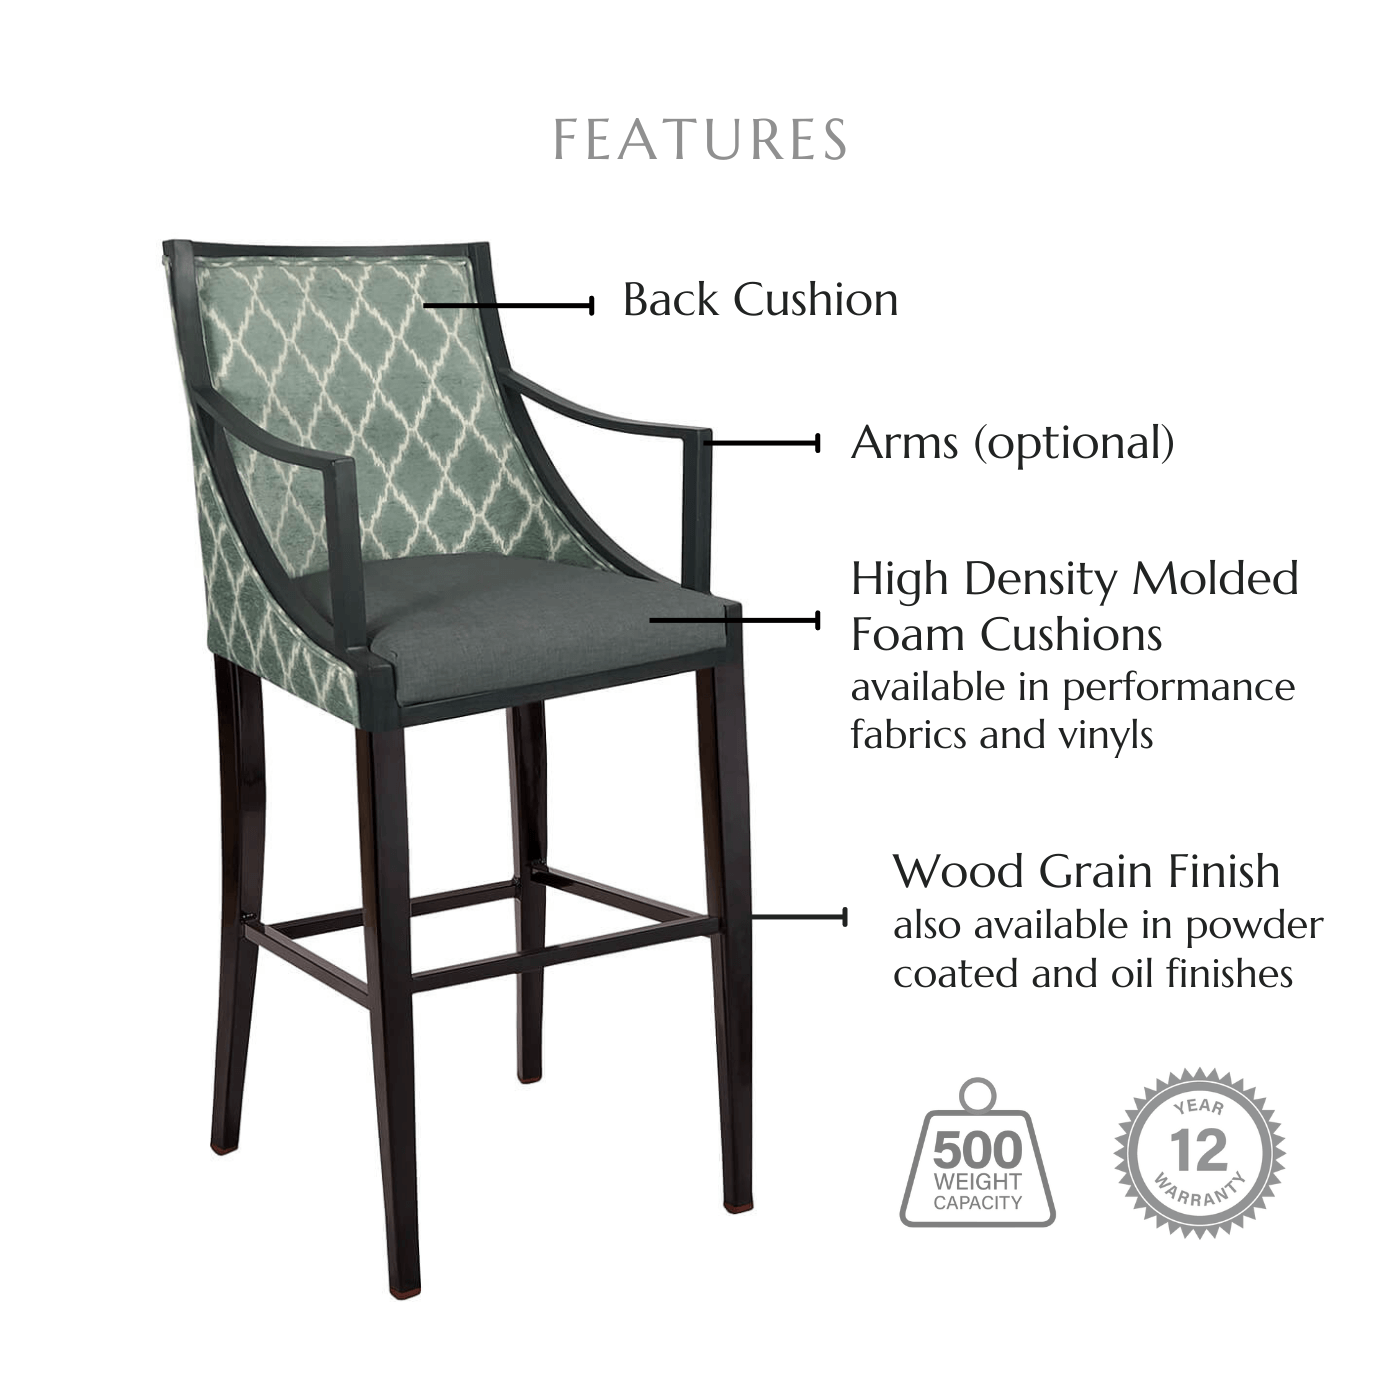 Featuring a back cushion, optional arms, high density molded foam cushions available in performance fabrics and vinyls, metal footplate, wood grain finish also available in powder coated and oil based finishes. This stool has a 500 lb weight capacity with a 12-year warranty.